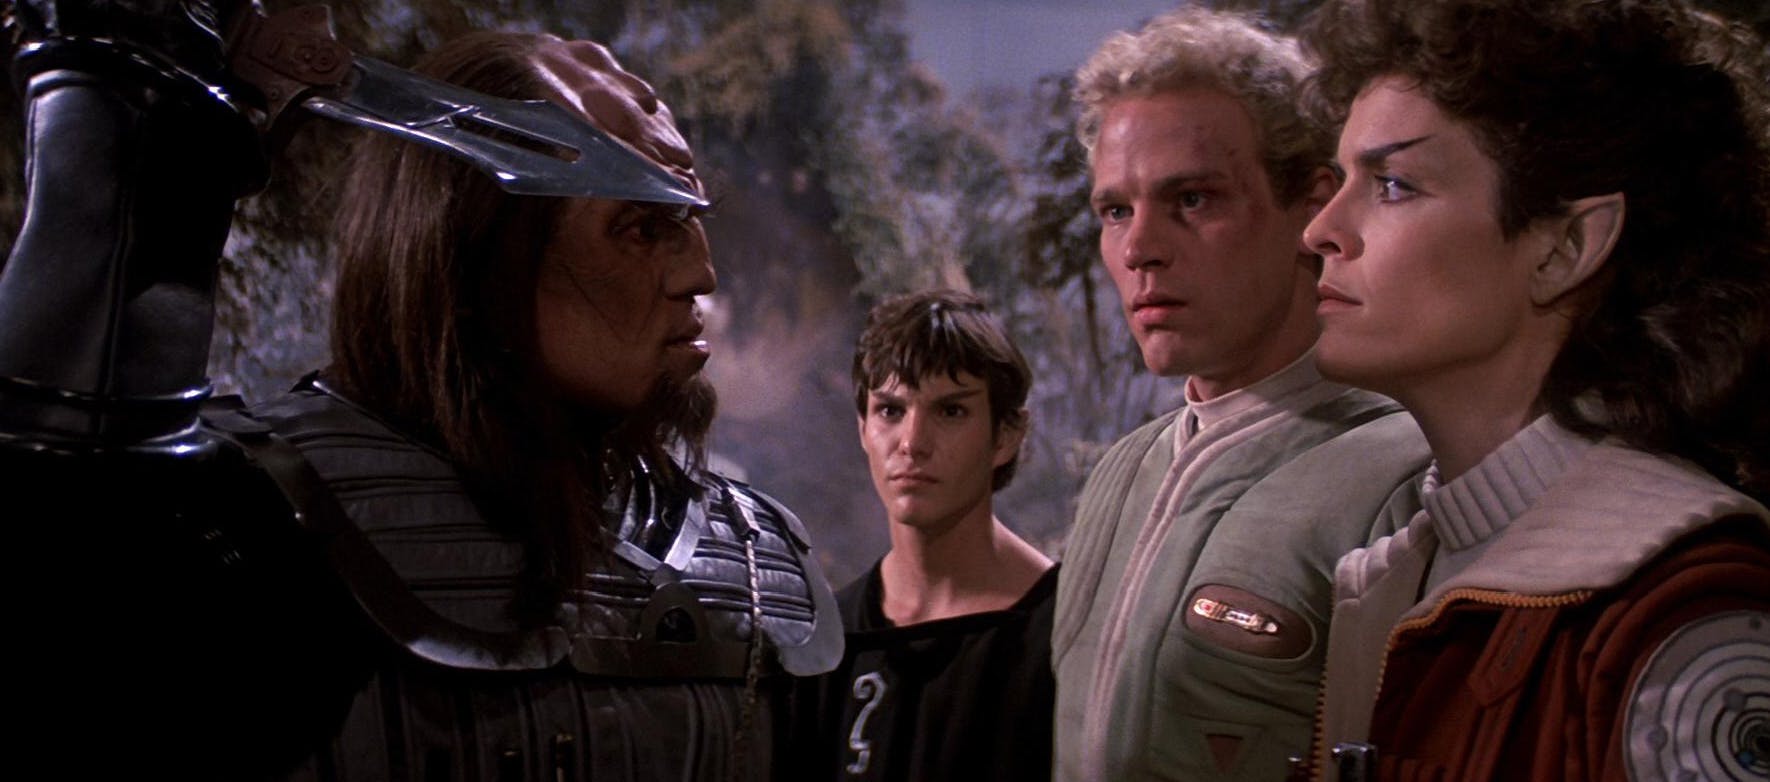 A Klingon lifts his dagger above him facing Saavik who reflects his intense gaze as David Marcus and a young Spock look at their foe in Star Trek III: The Search for Spock